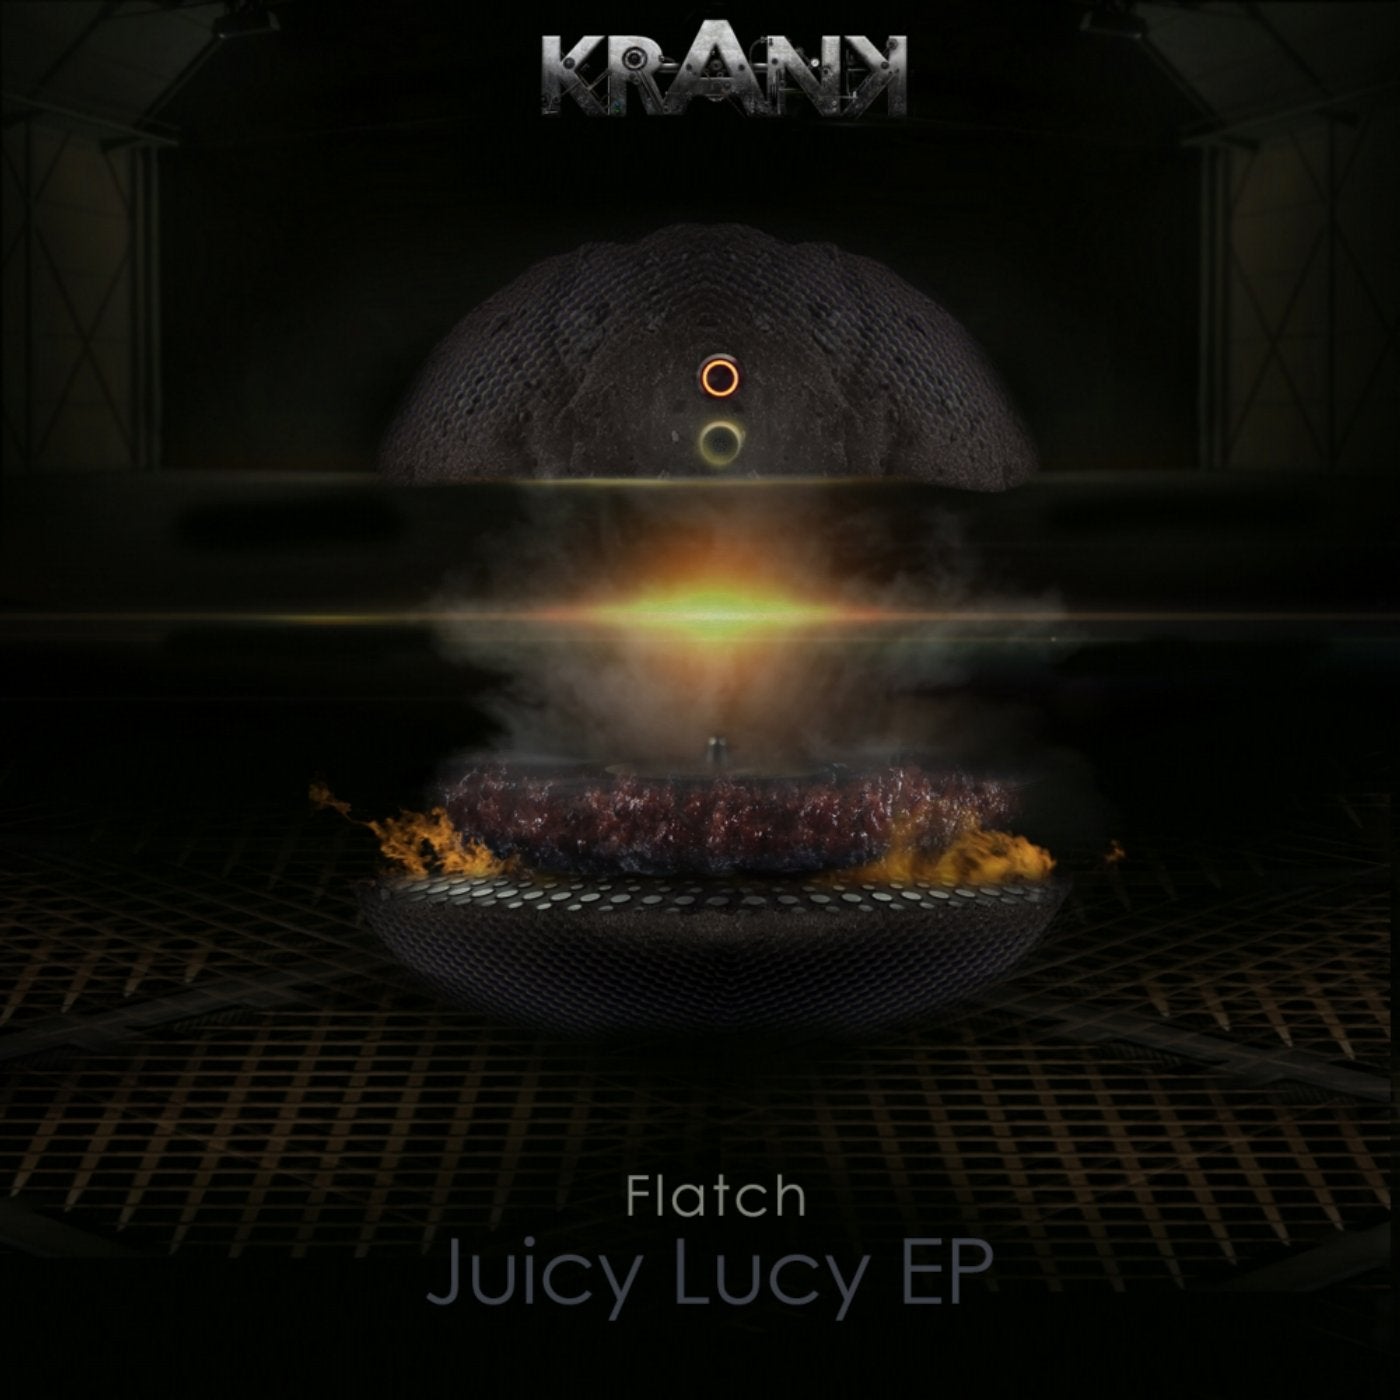 Juicy Lucy EP